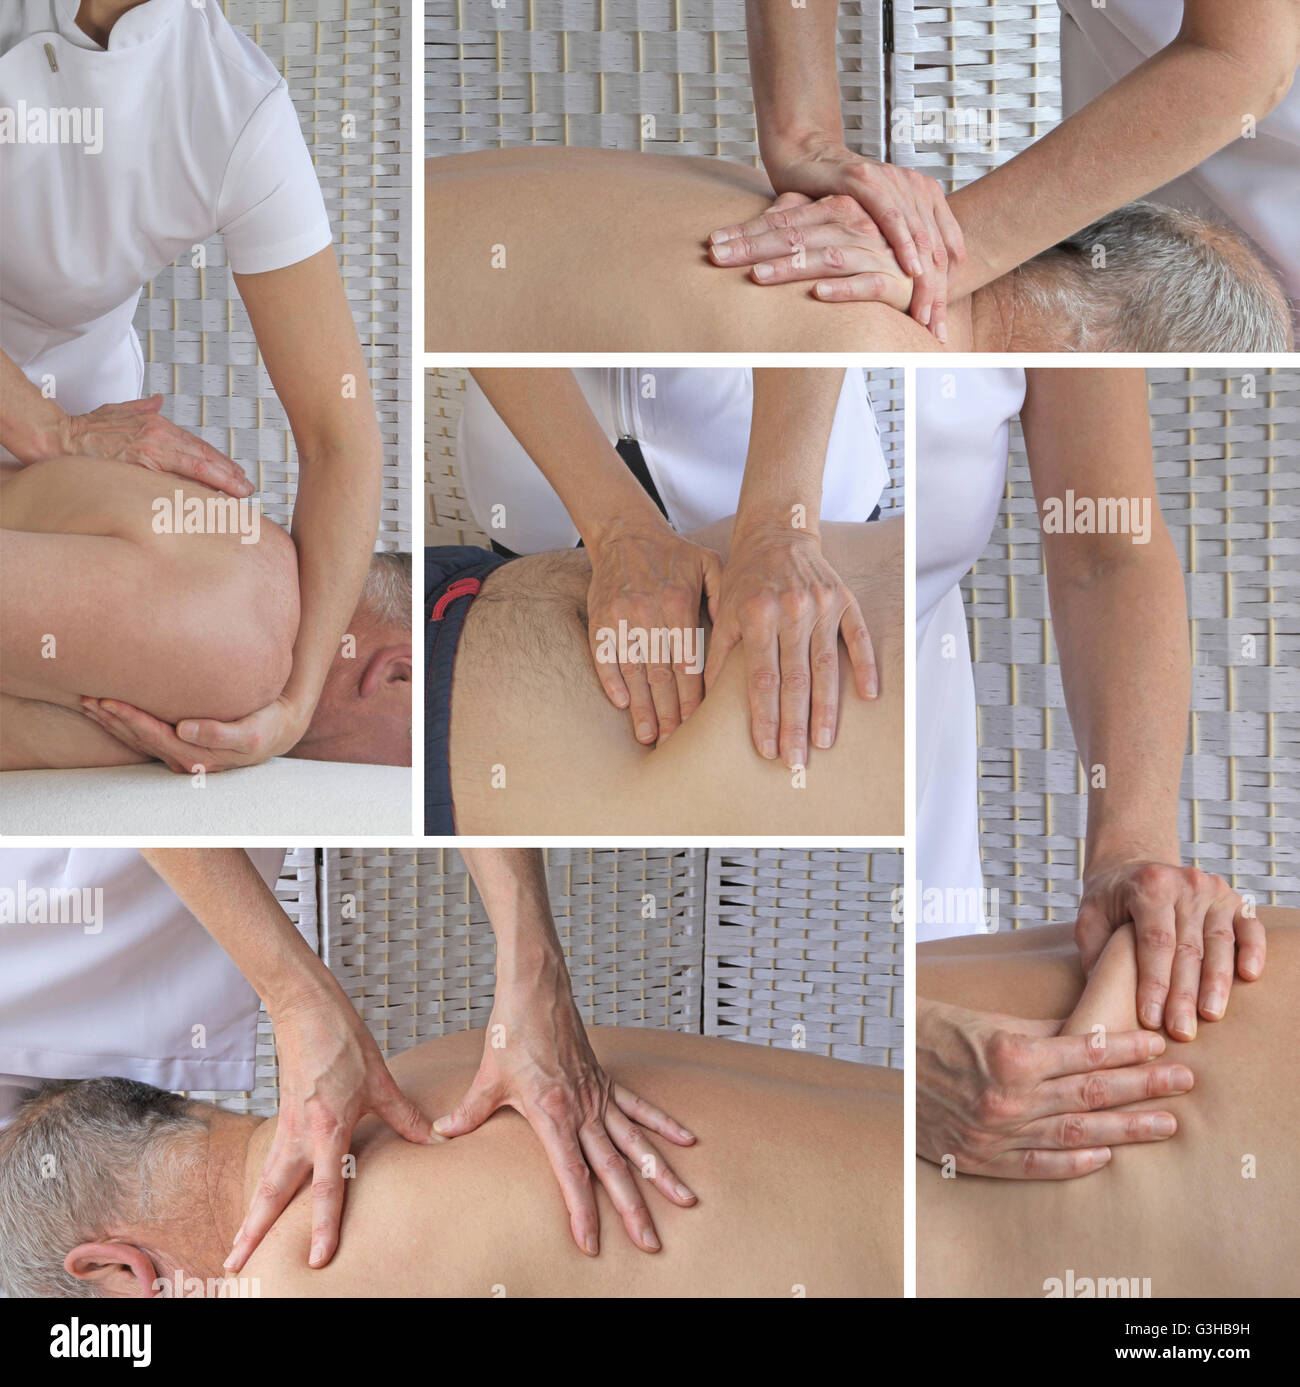 Five different views of a sports massage therapist using different massage techniques on male client Stock Photo